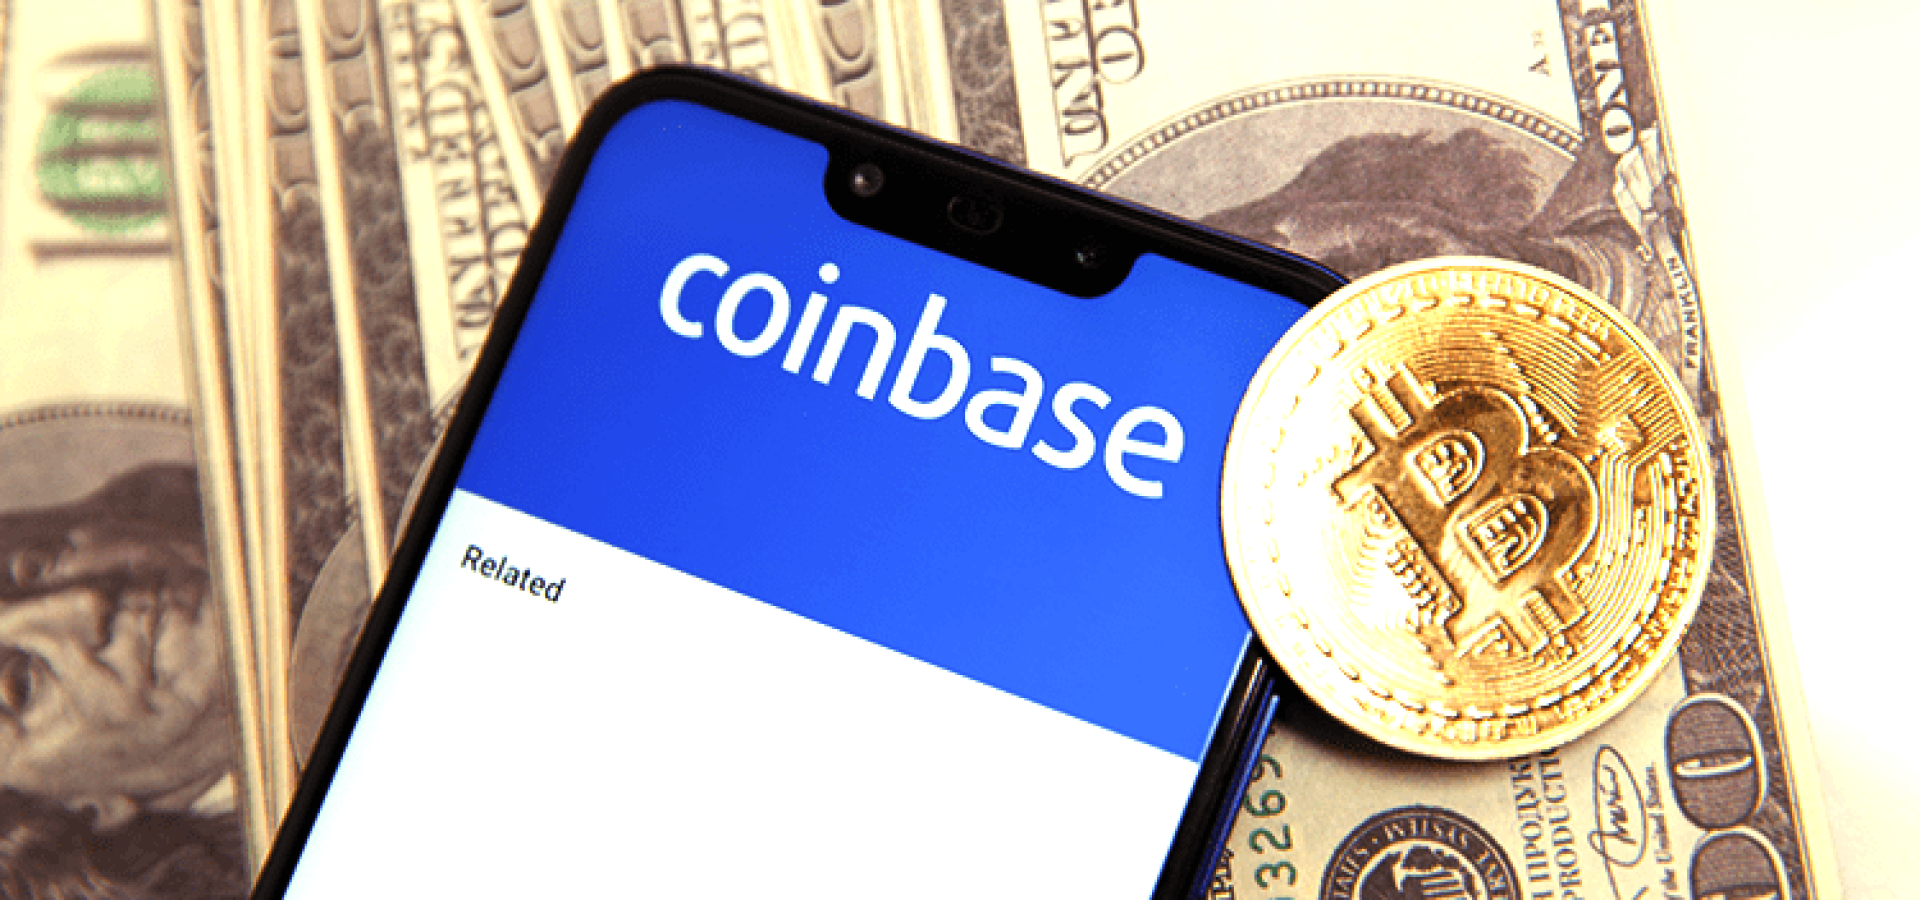 Coinbase LauncCoinbase wallet and new opportunitieshed Visa Debit Card in European Countries - Wibest Broker